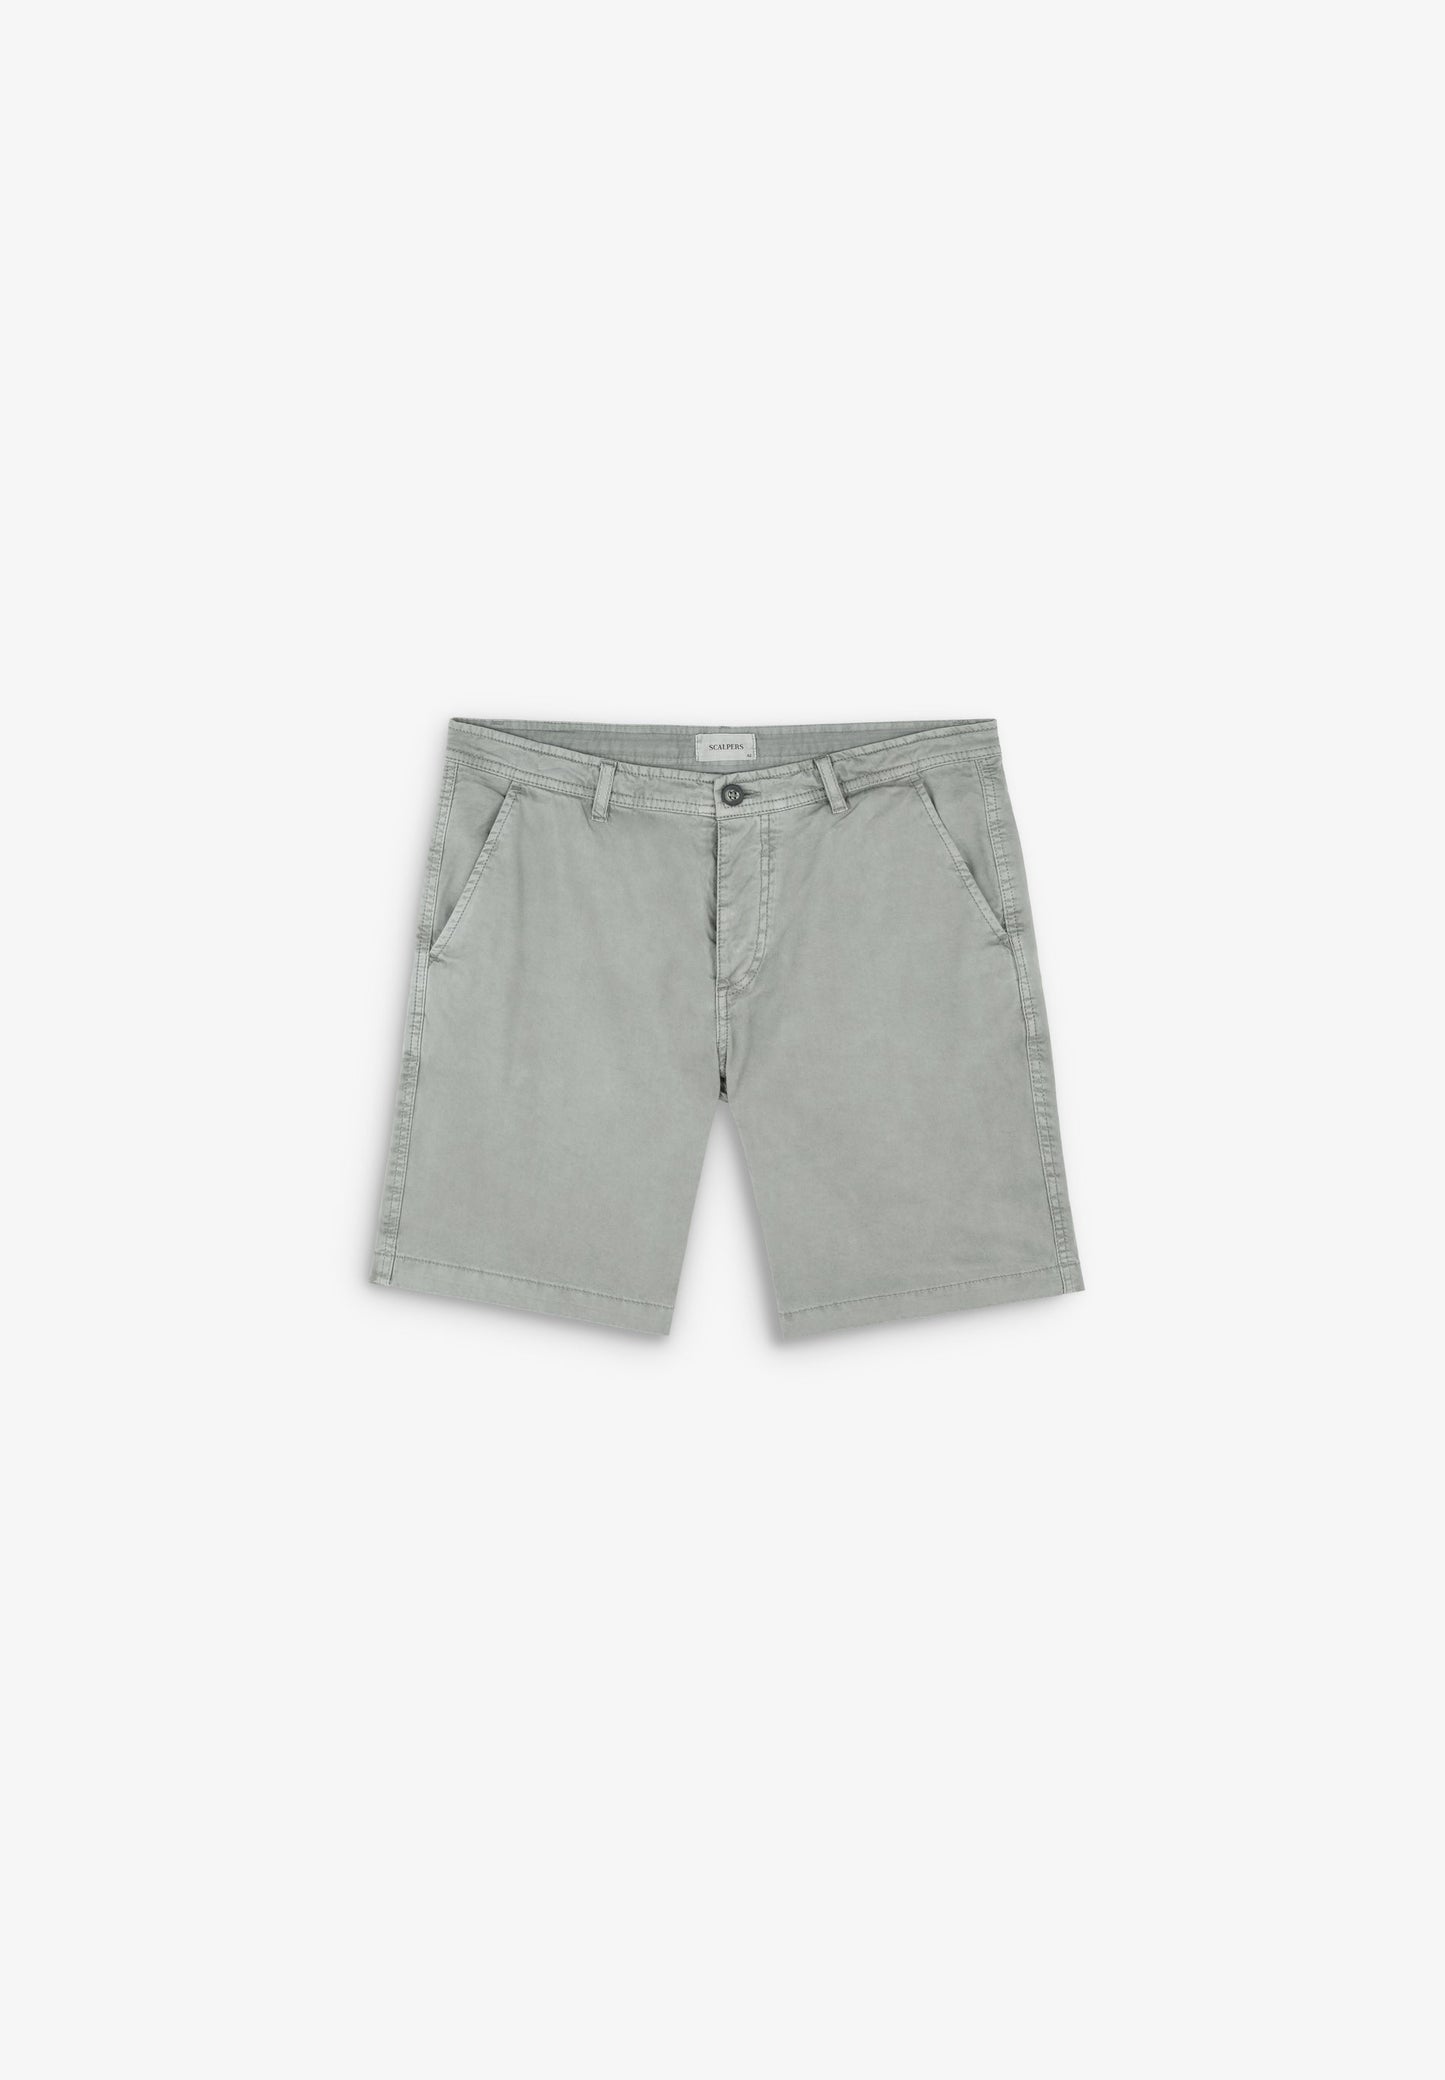 OUTFITTERS BT SHORTS